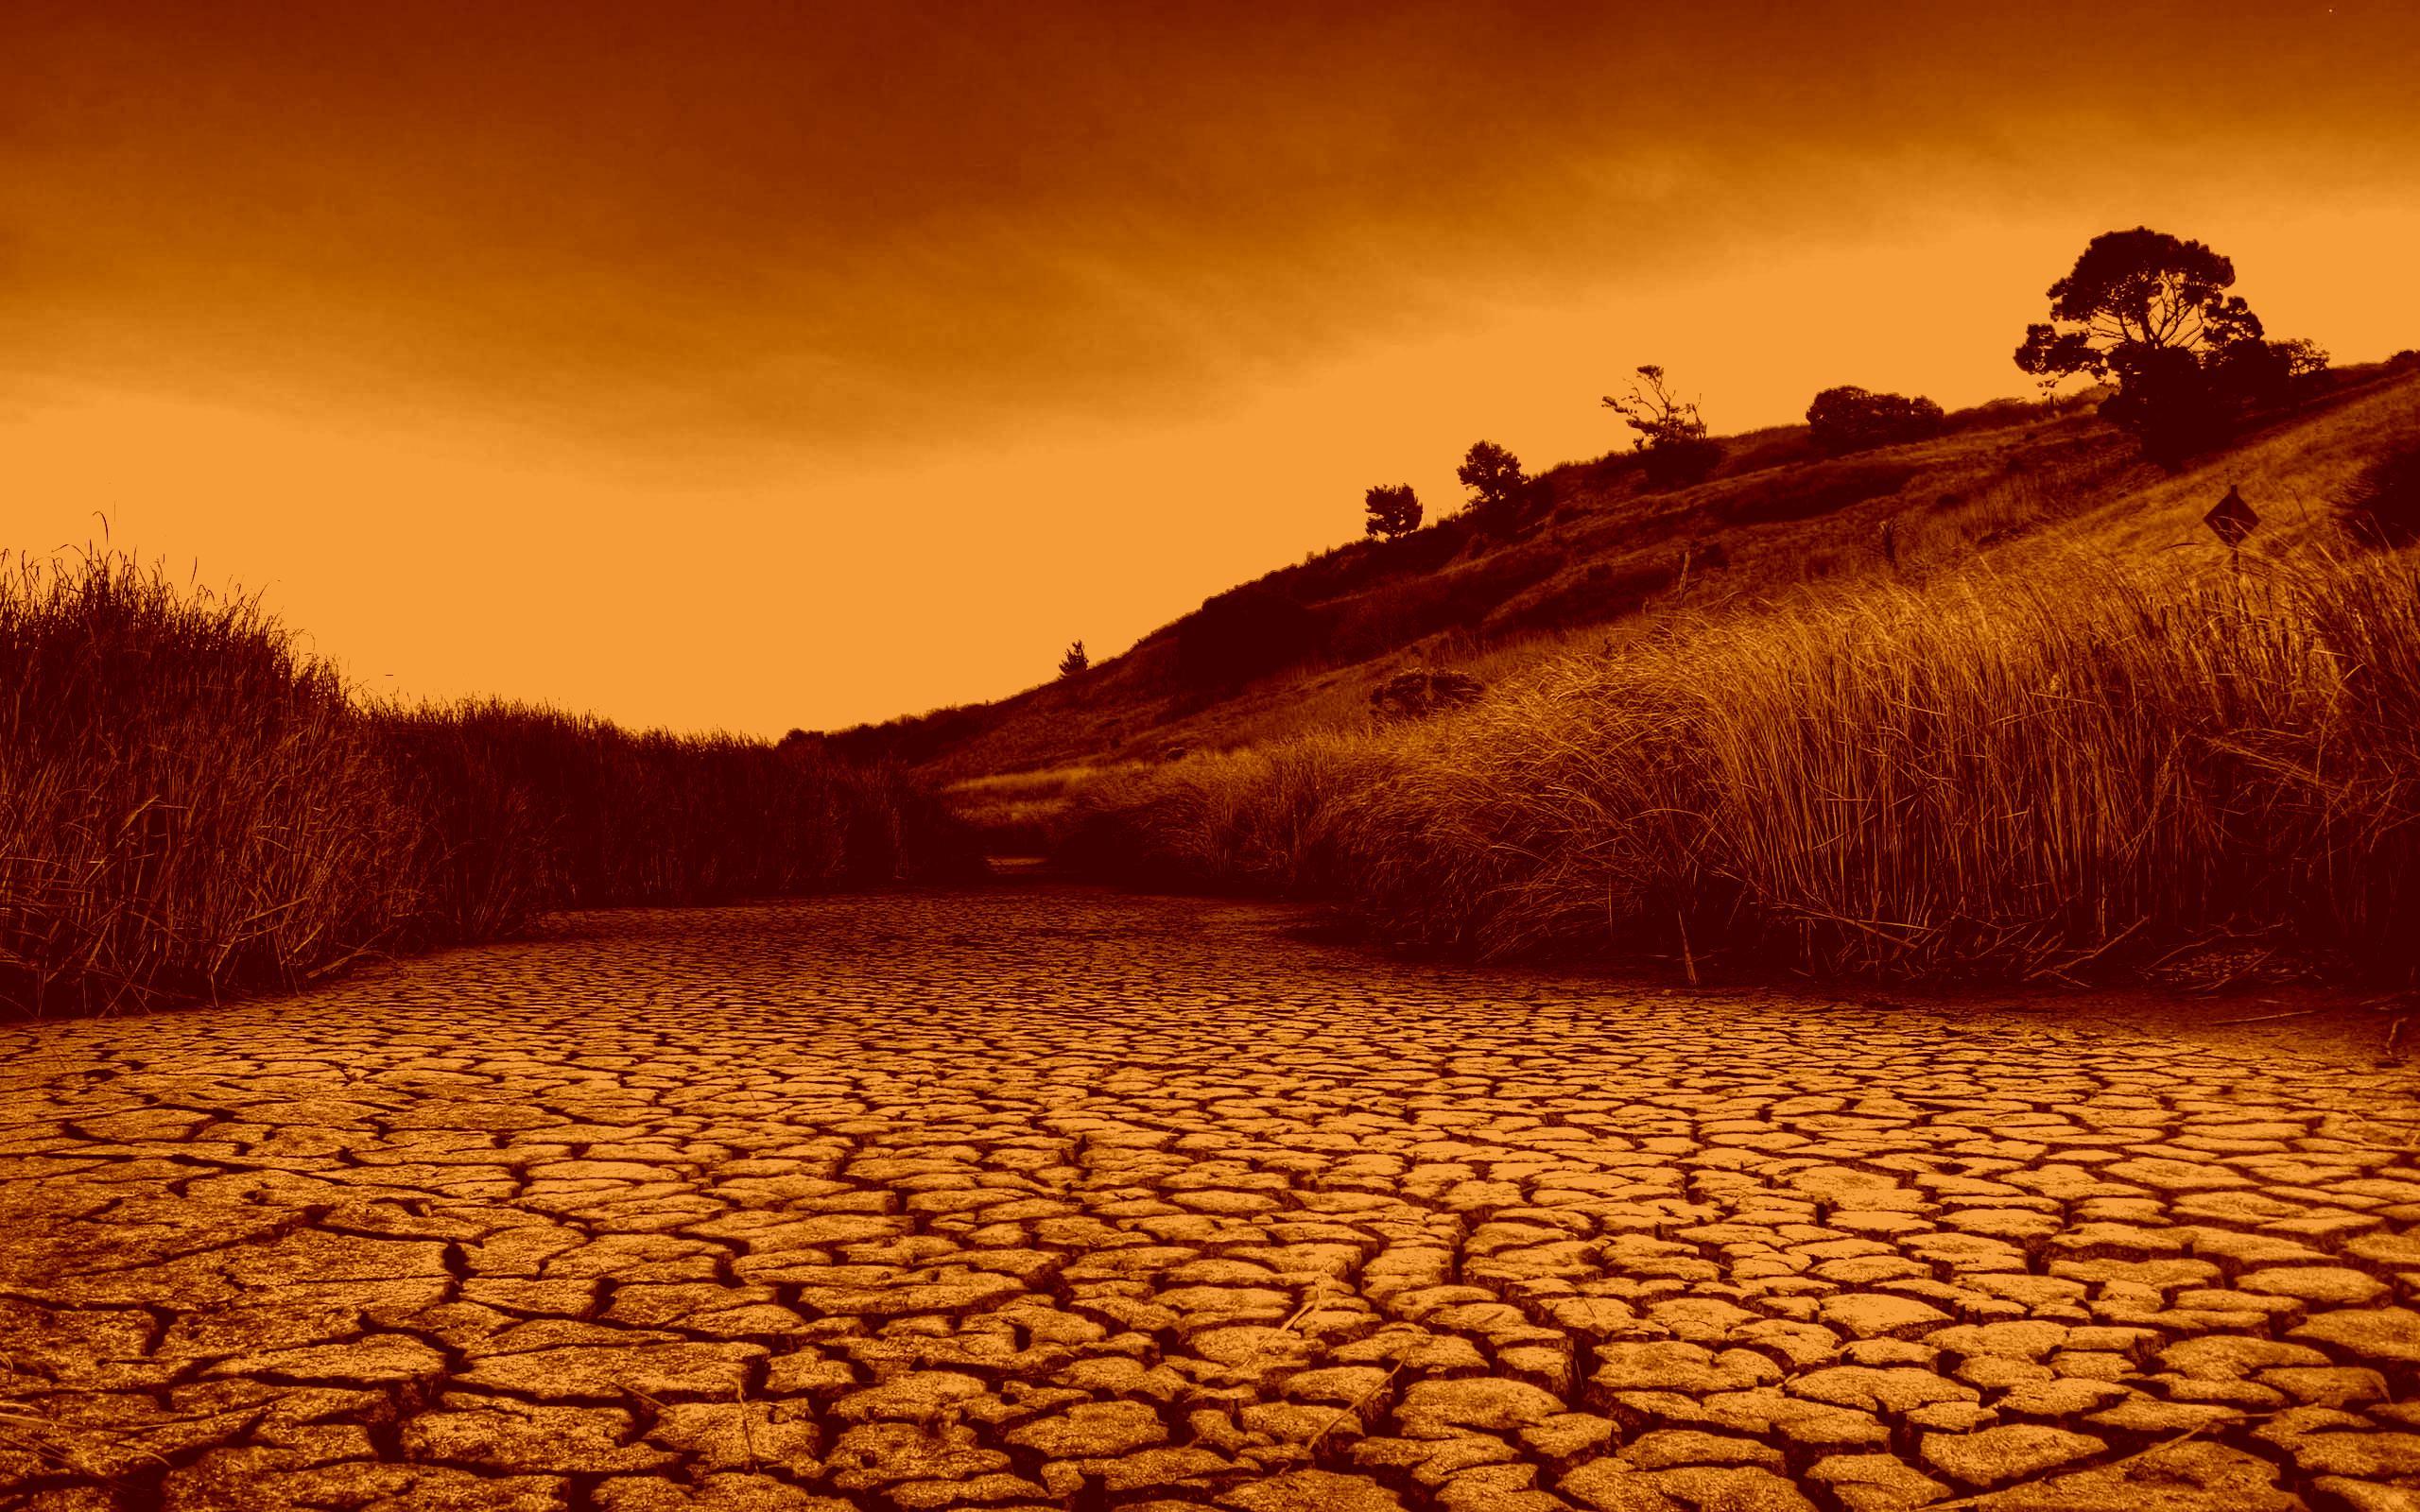 CQ311: Drought Wallpaper, Drought Pics In High Quality, W.Web